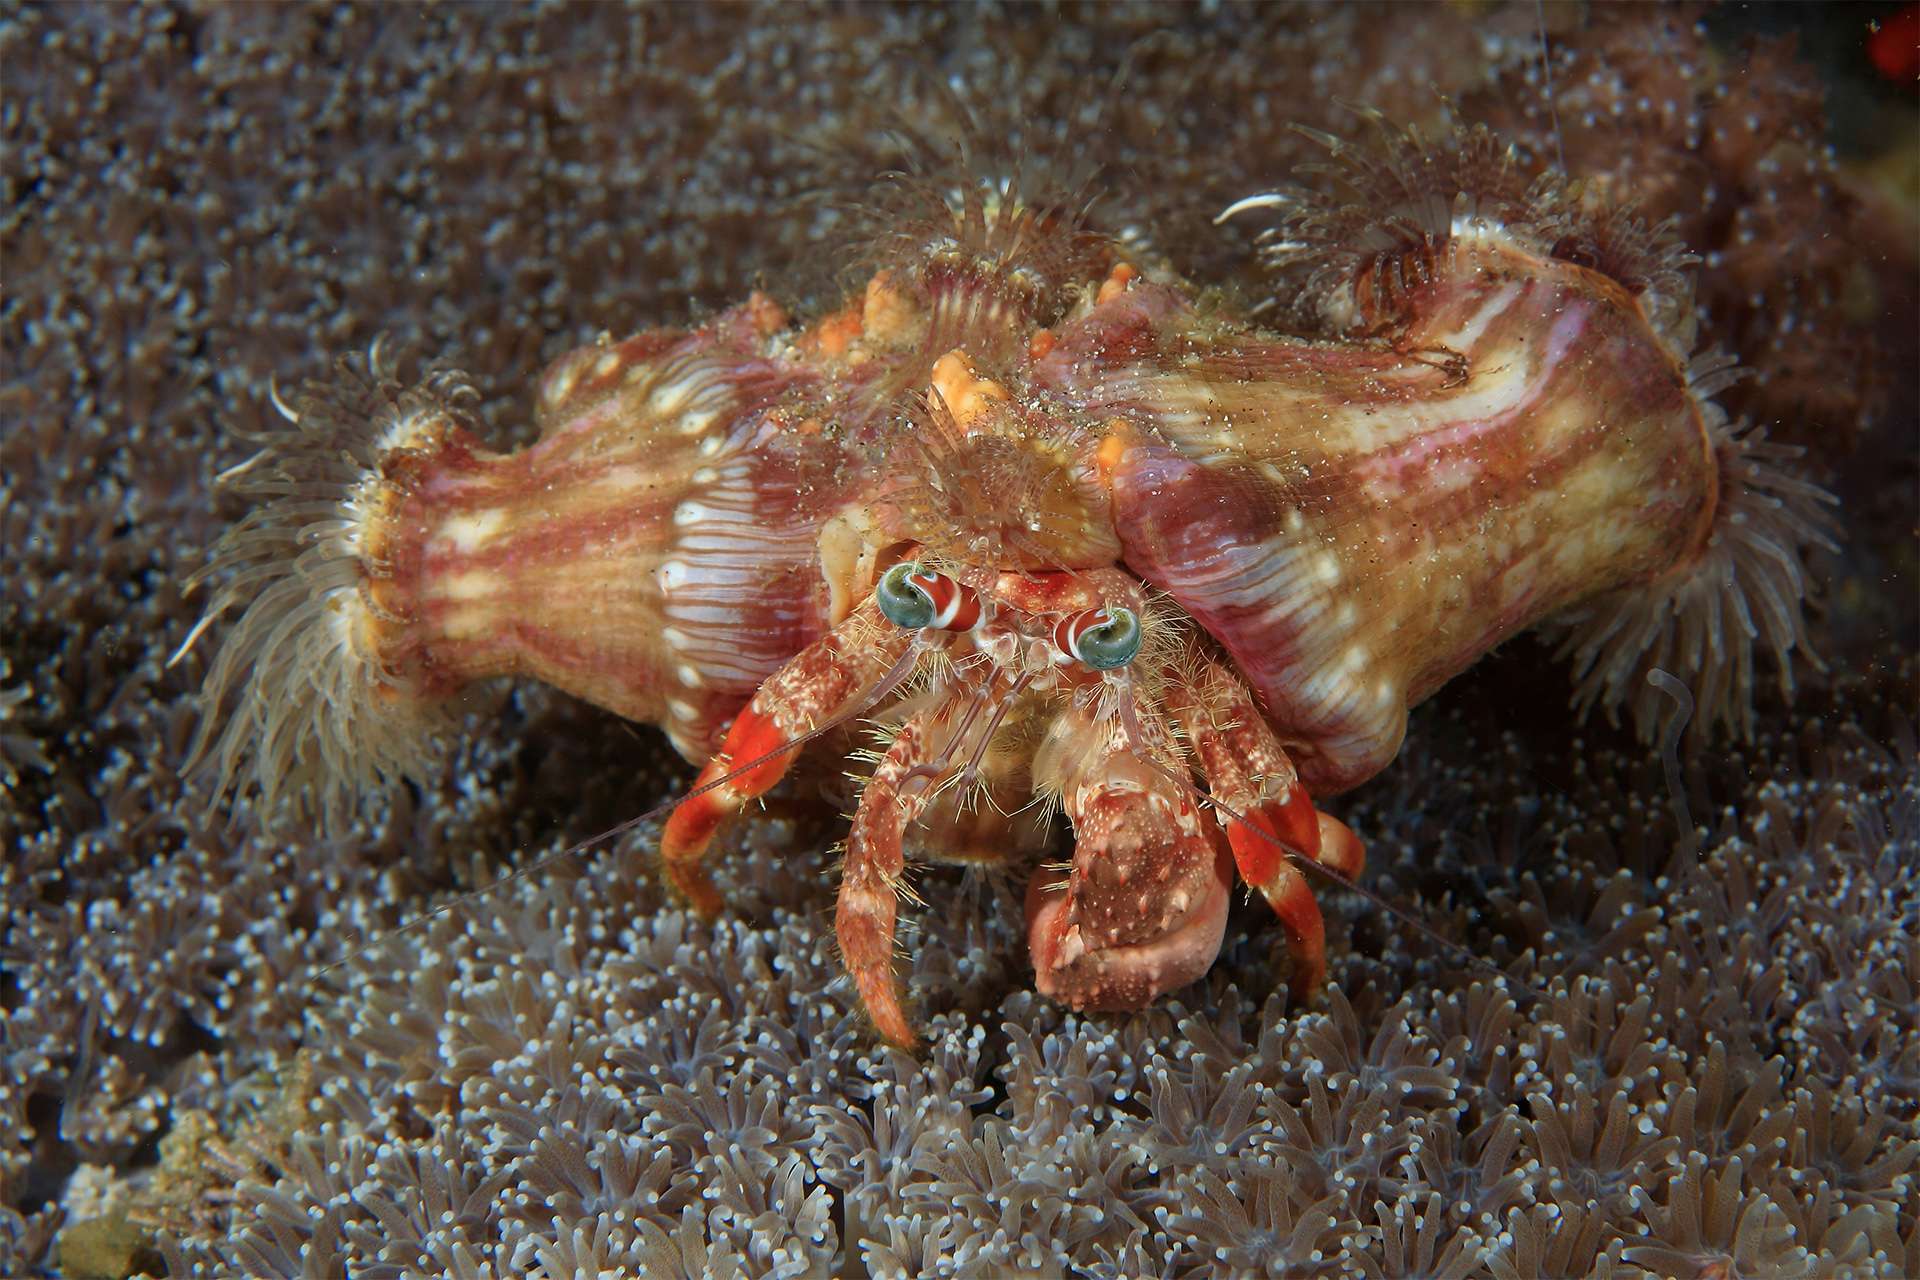 Hermit Crab with anemone on its shell, mutualism, symbiosis